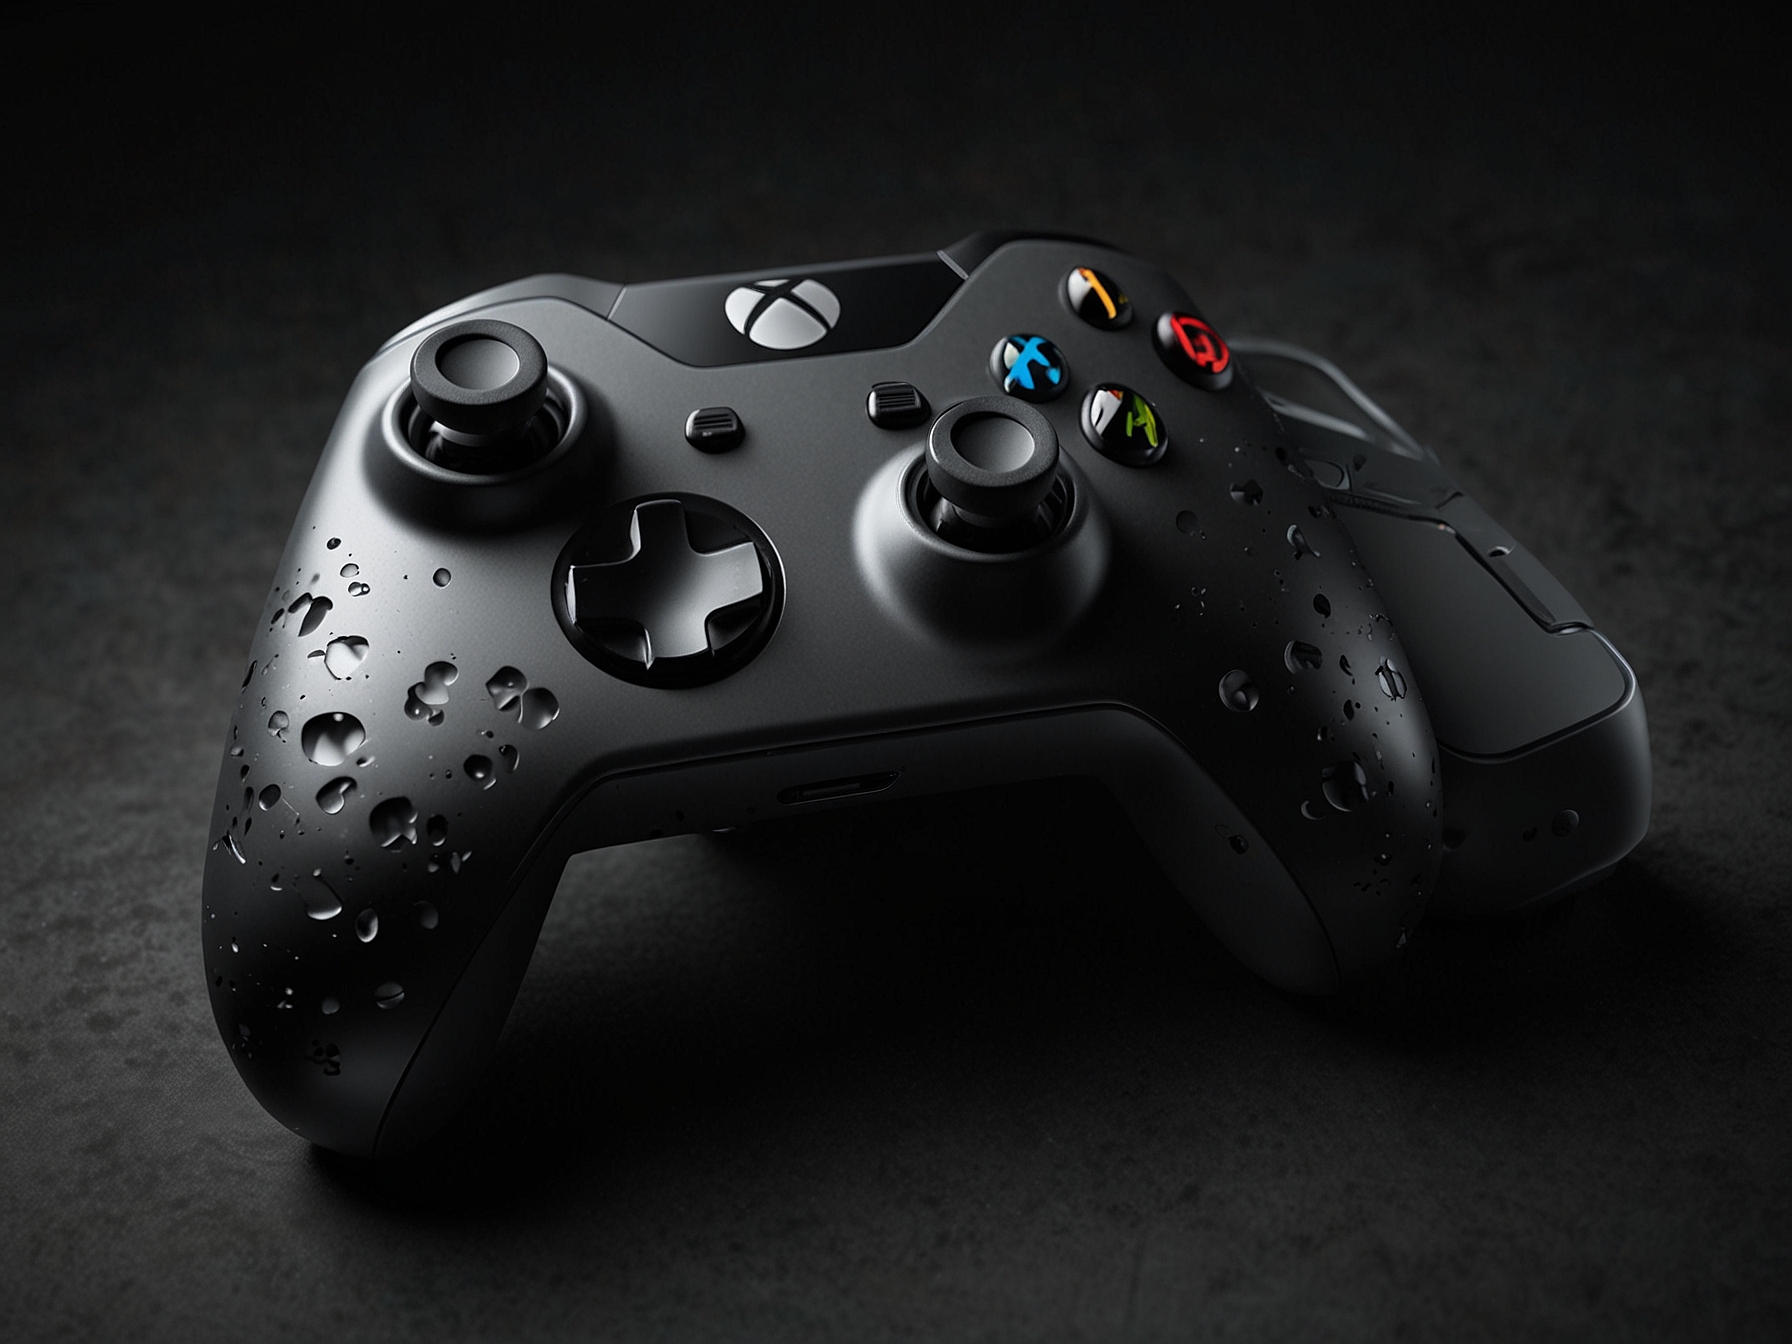 The Xbox Elite Series 2 controller displayed with all its interchangeable components, including thumbsticks and paddles, highlighting its customization options and carrying case for gamers on the go.